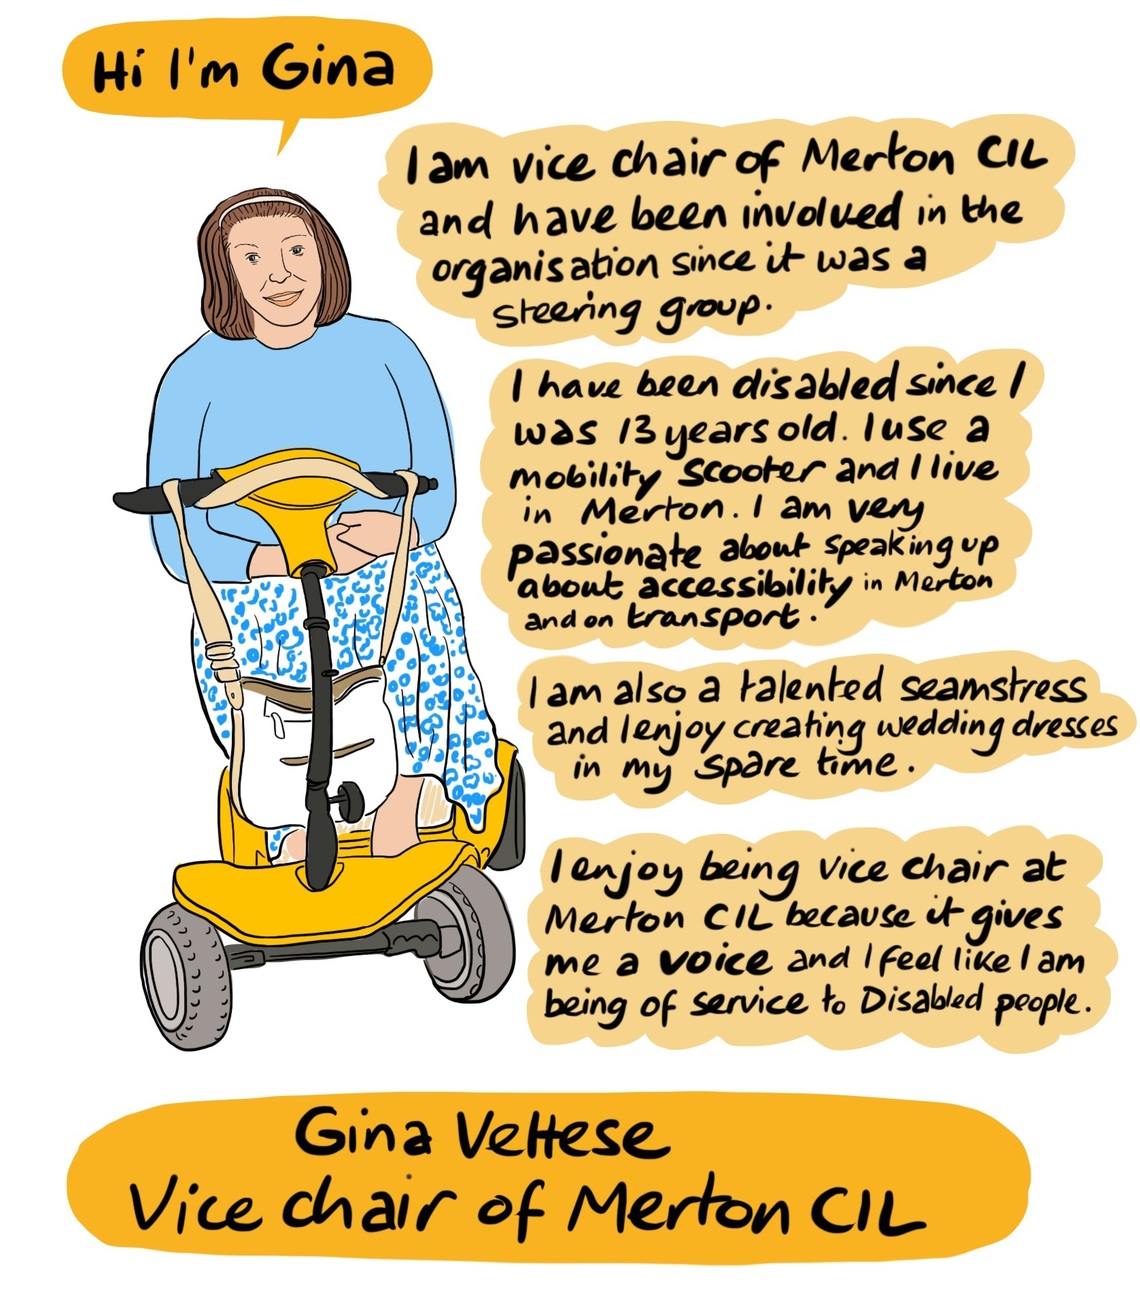 Our Vice Chair Gina - Gina has been Disabled since she was 13 years old and involved with Merton CIL since it was just a steering group. Gina is passionate about accessibility and does work to make Merton accessible. She was also involved with Go4M and is a talented seamstress creating wedding dresses and more in her spare time. 